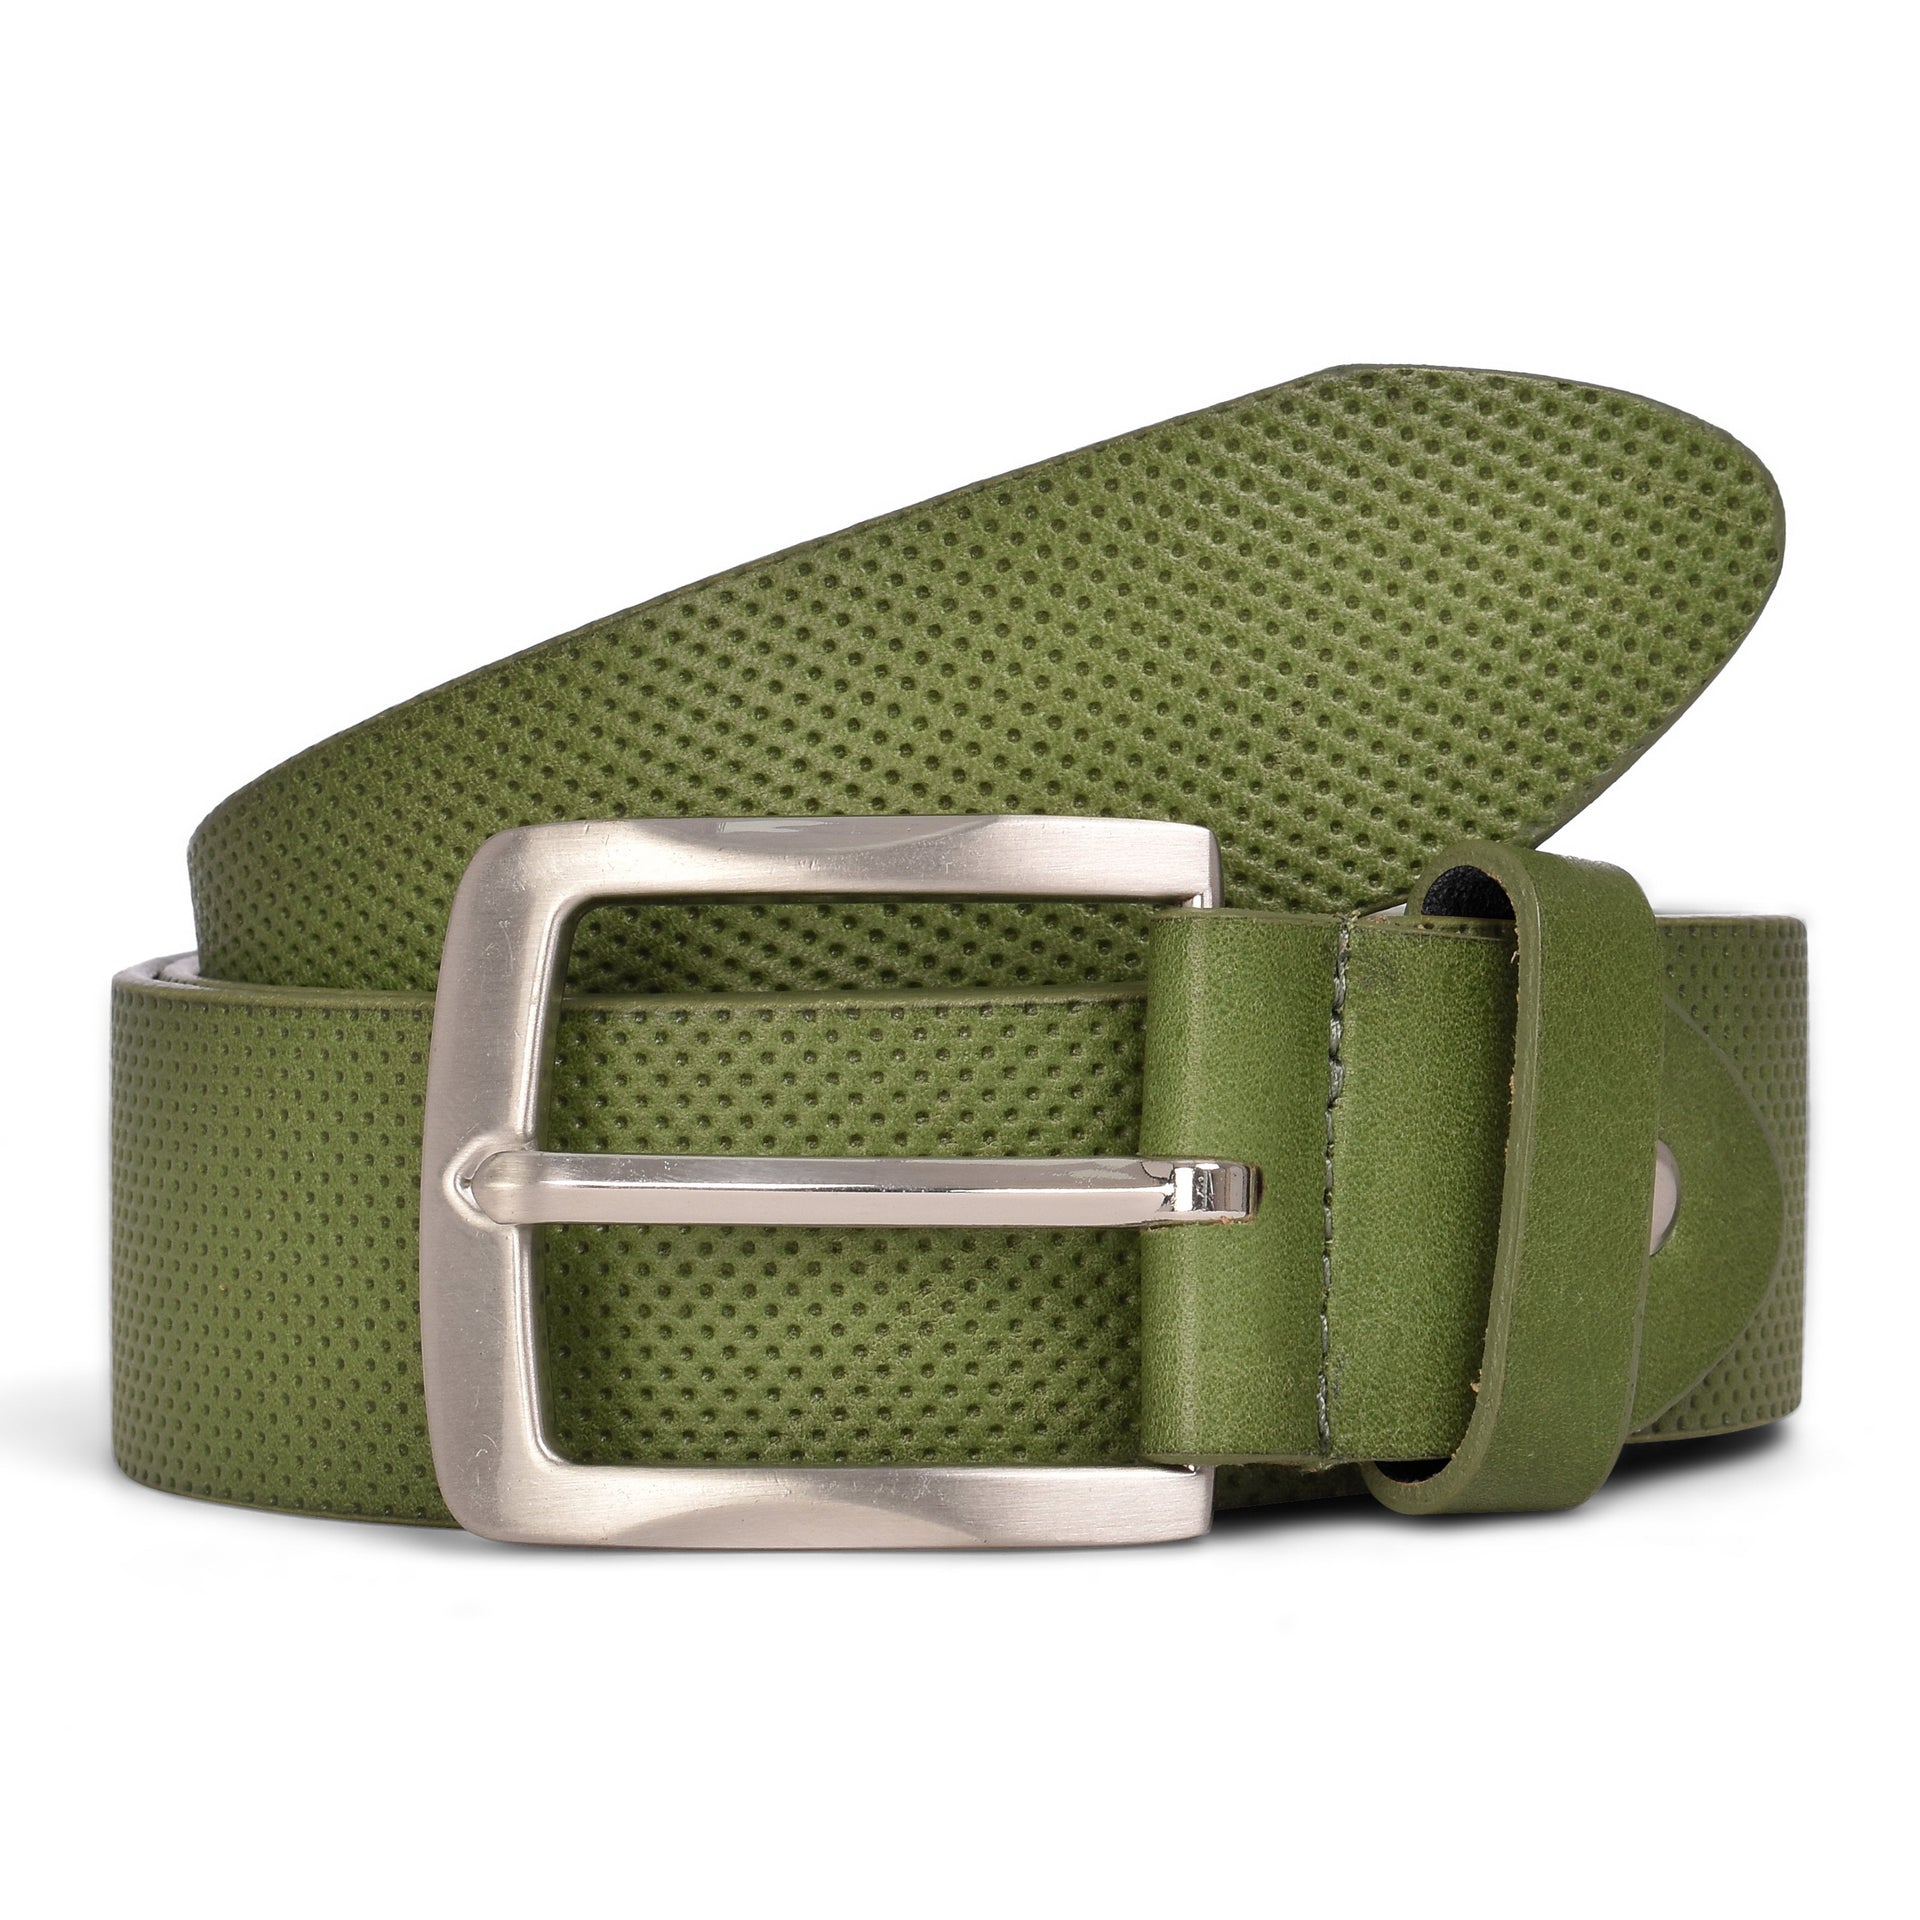 Perforated Casual Belt - Leaf Green / 30 inch - 75 cm - 